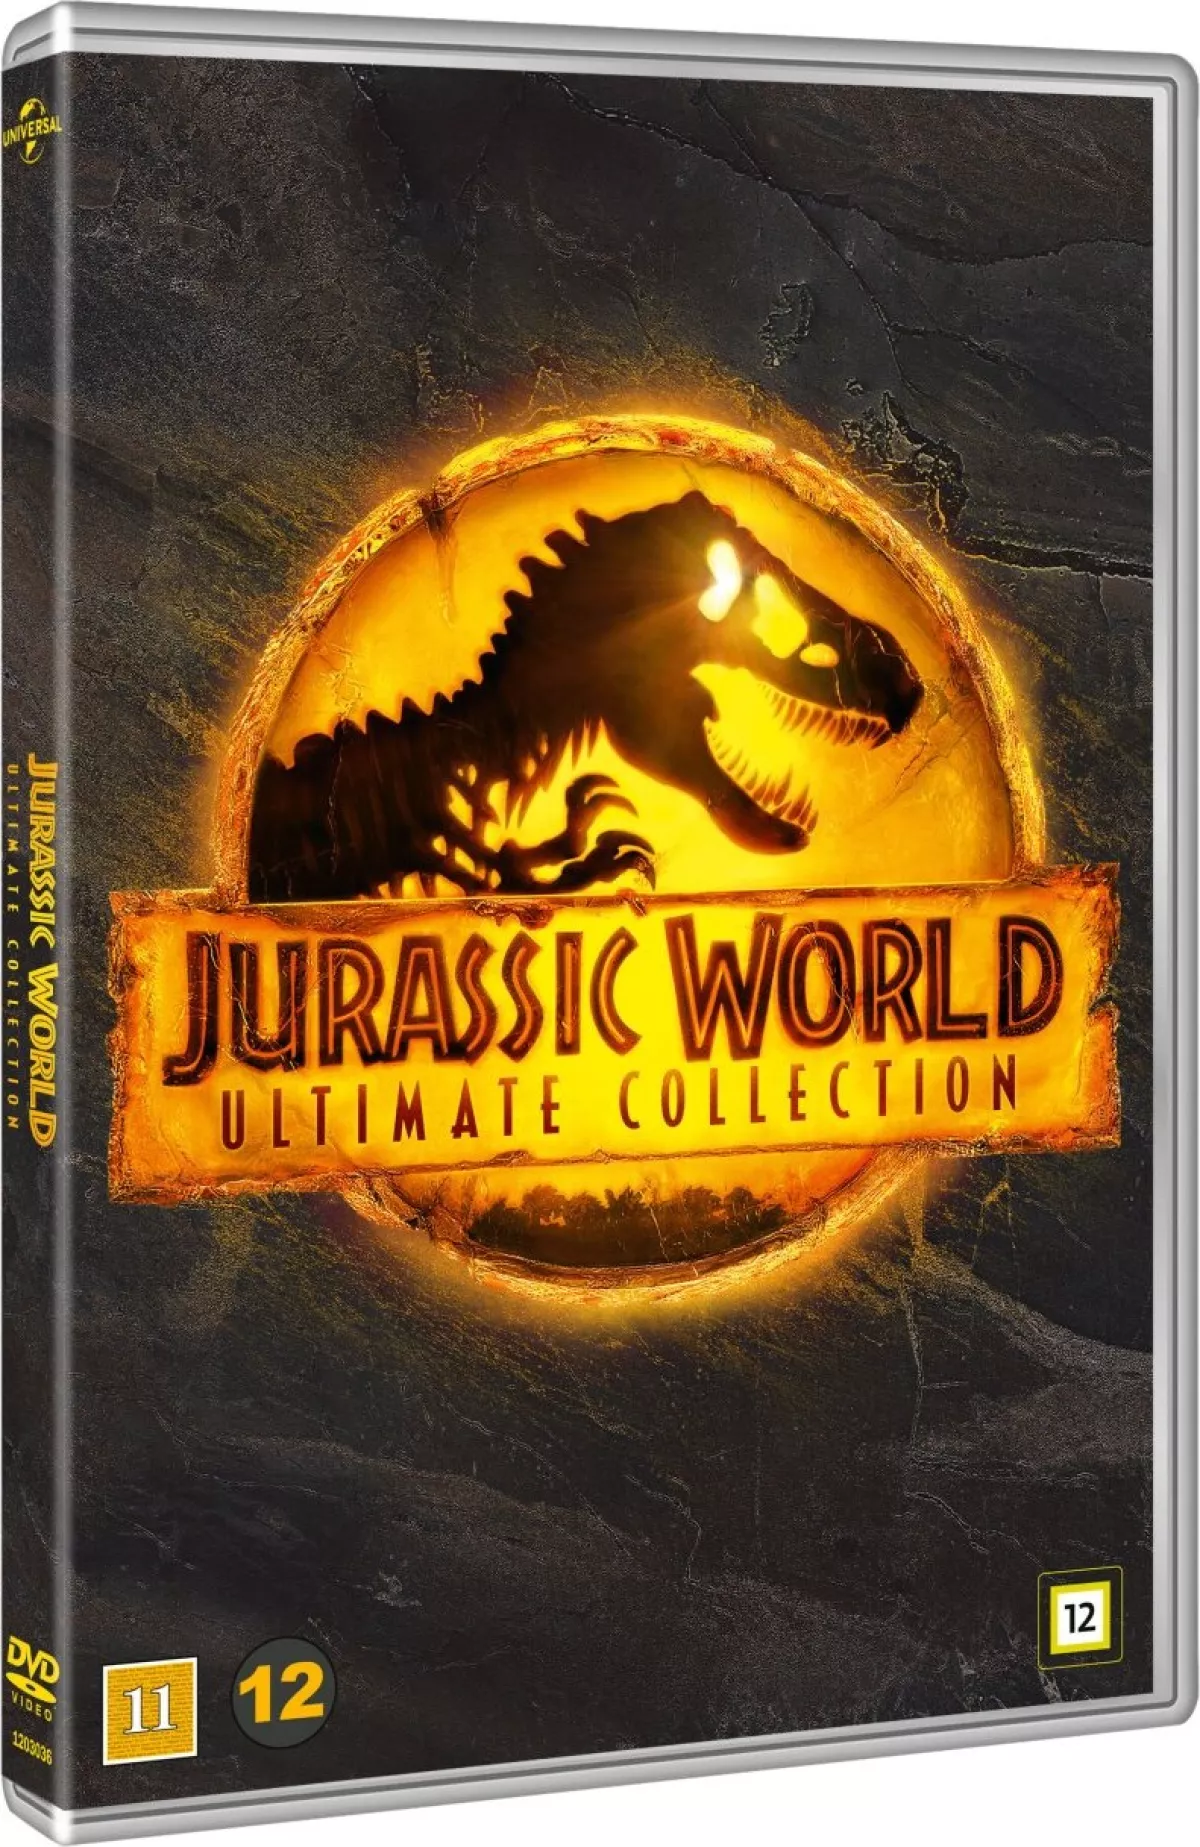 #1 - Jurassic World - Ultimate Collection - DVD - Film